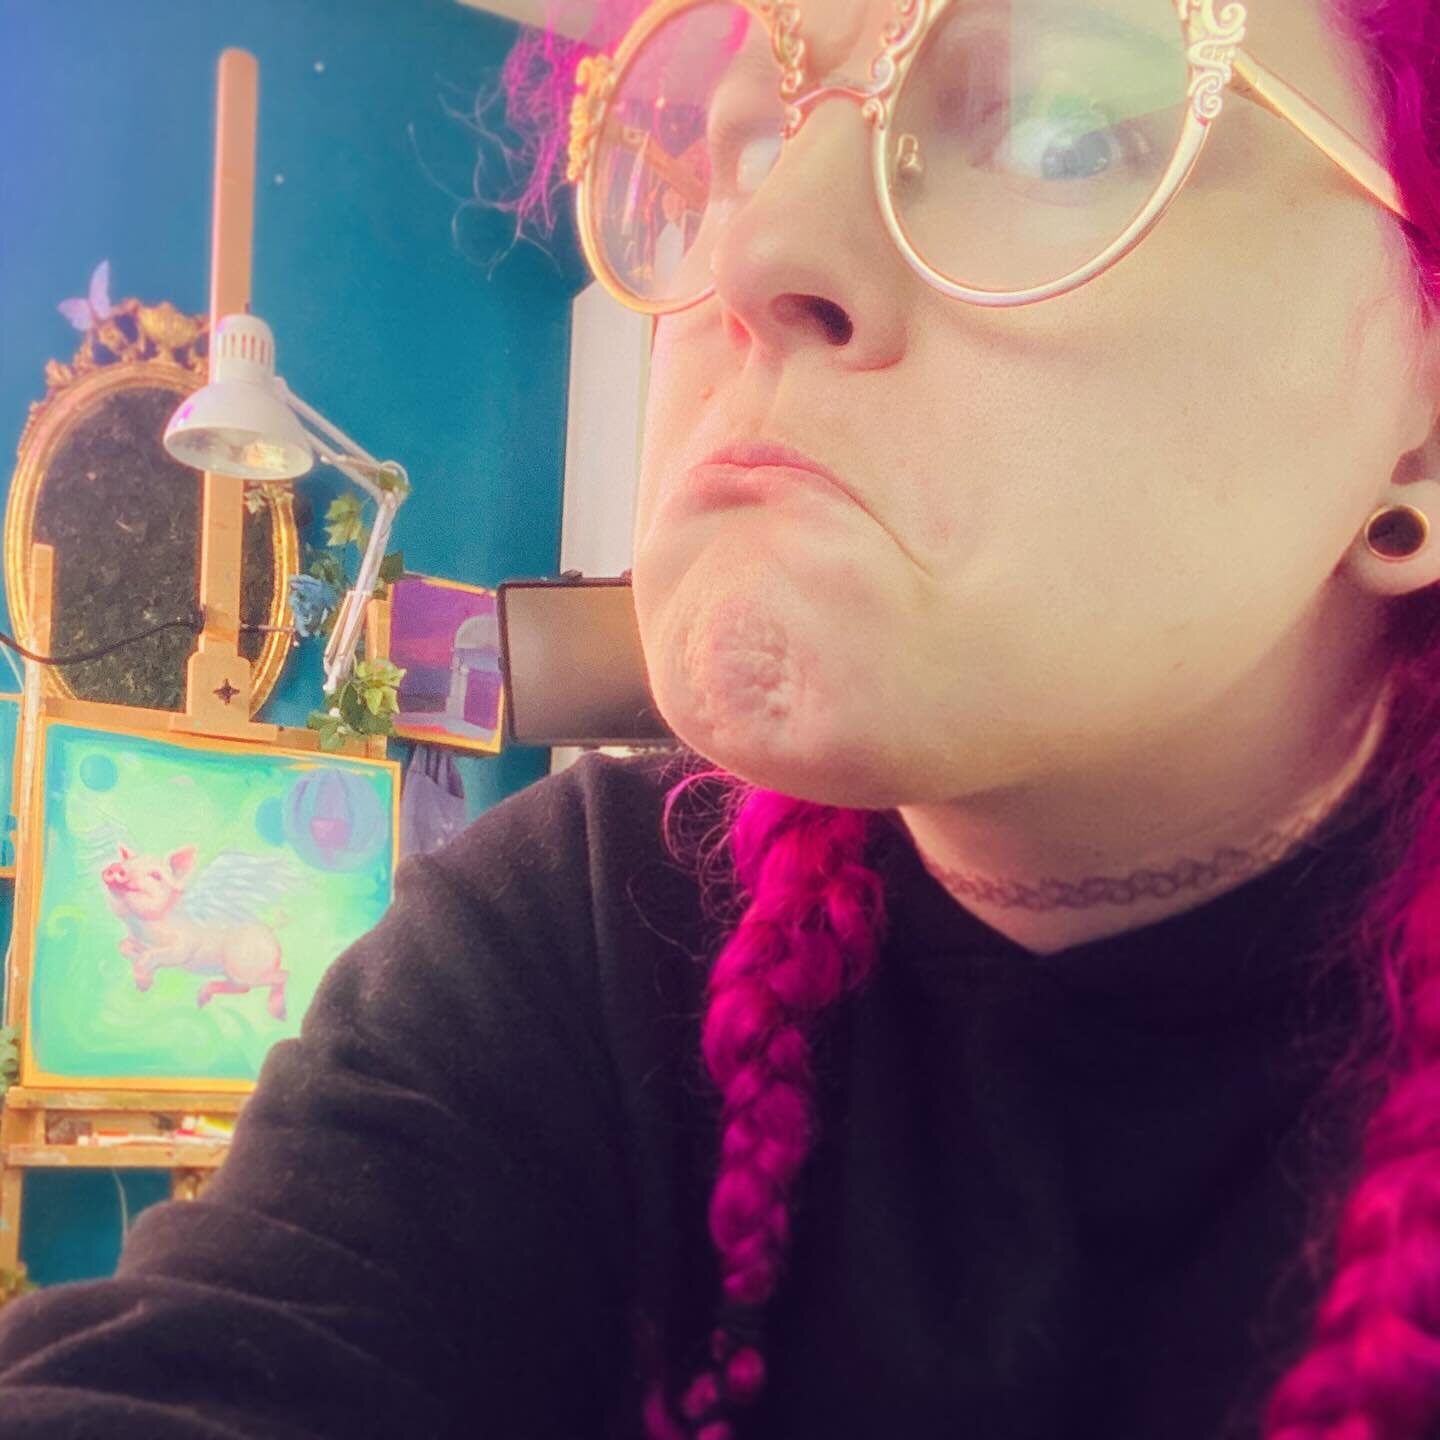 I heard somewhere in threads that I gotta post my gross studio selfies or else i&rsquo;m not a real artist. Please have this one while I wait for the gorilla suit to come in the mail 👀😂✨